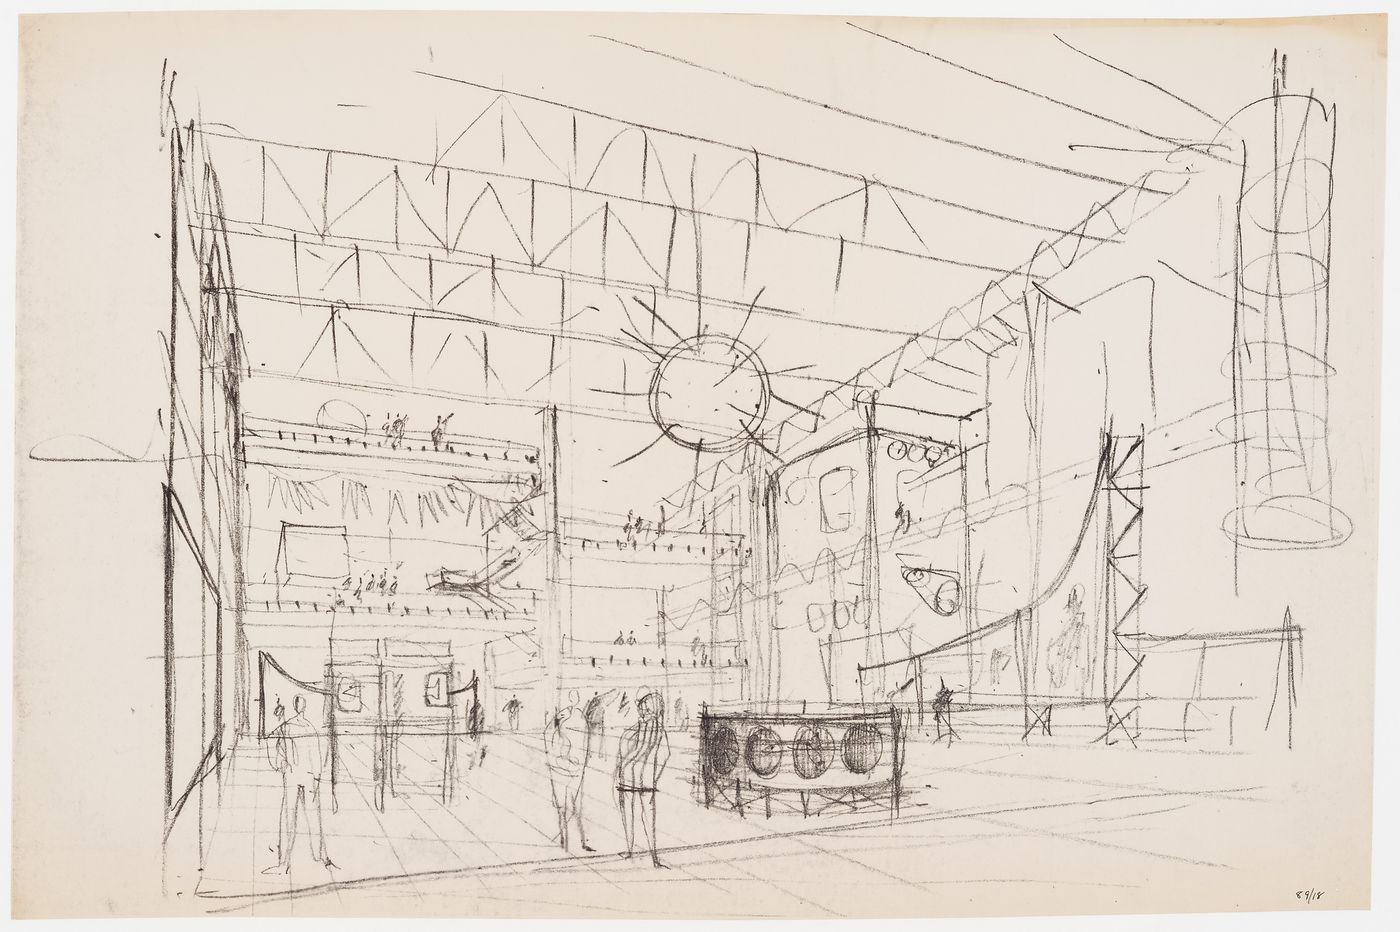 Perspective drawing of an interior, possibly an interior space in the Life Conditioner Box (drawing from Atom project records)